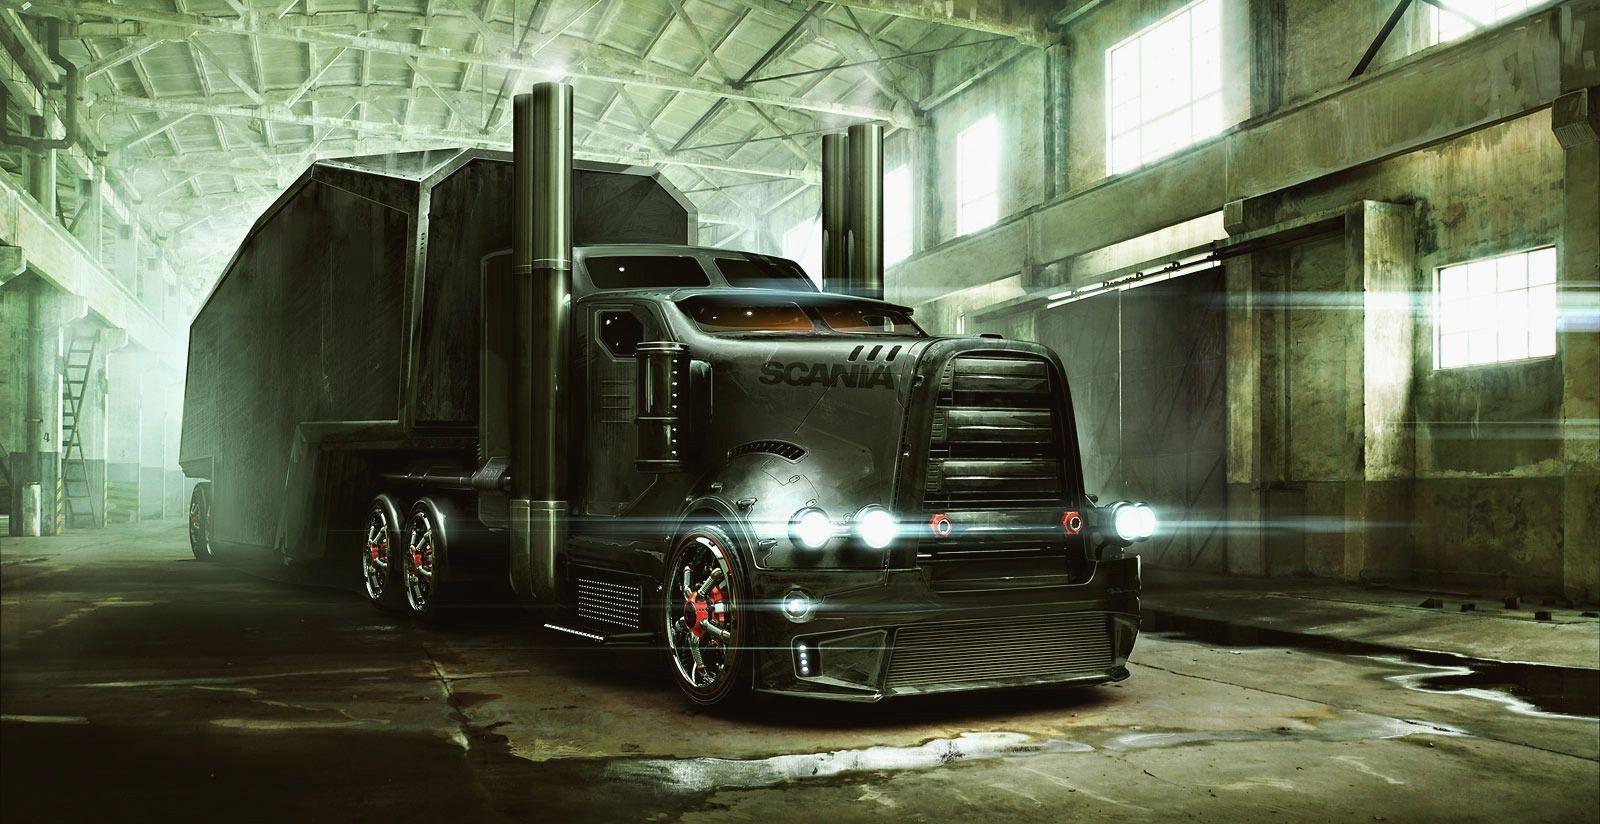 Truck Wallpapers and Backgrounds Image